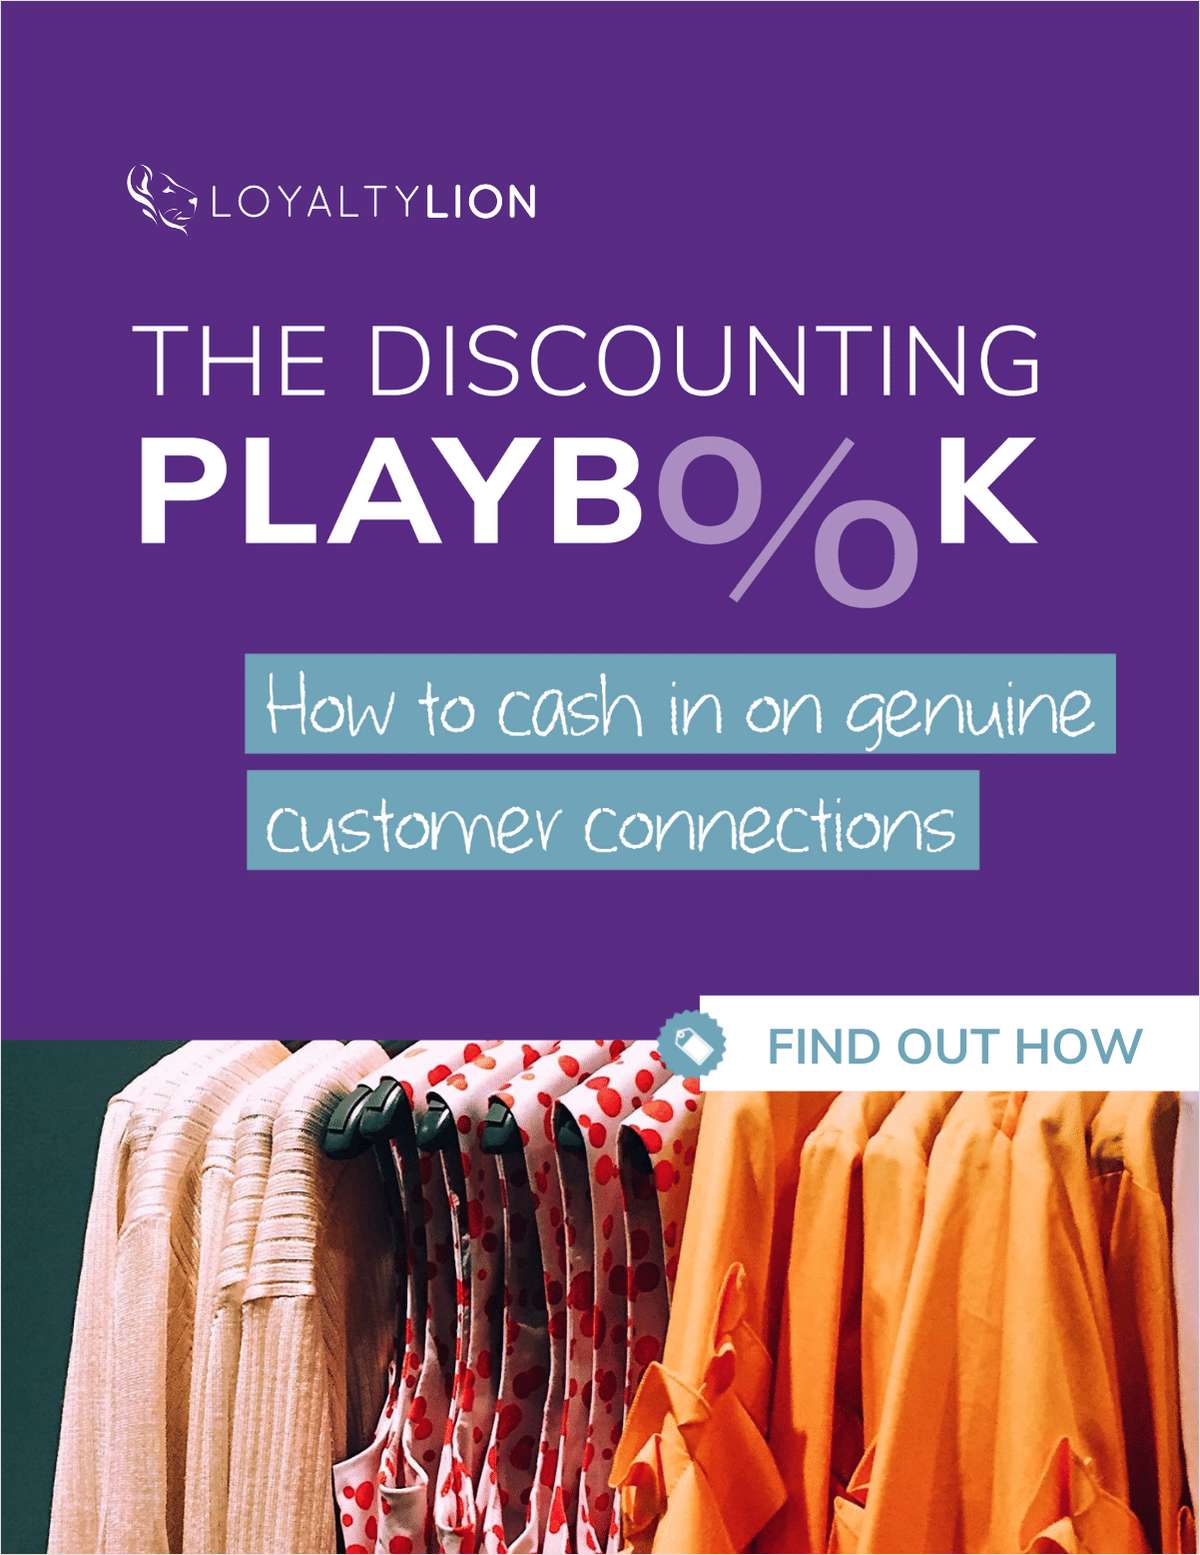 The Discounting Playbook